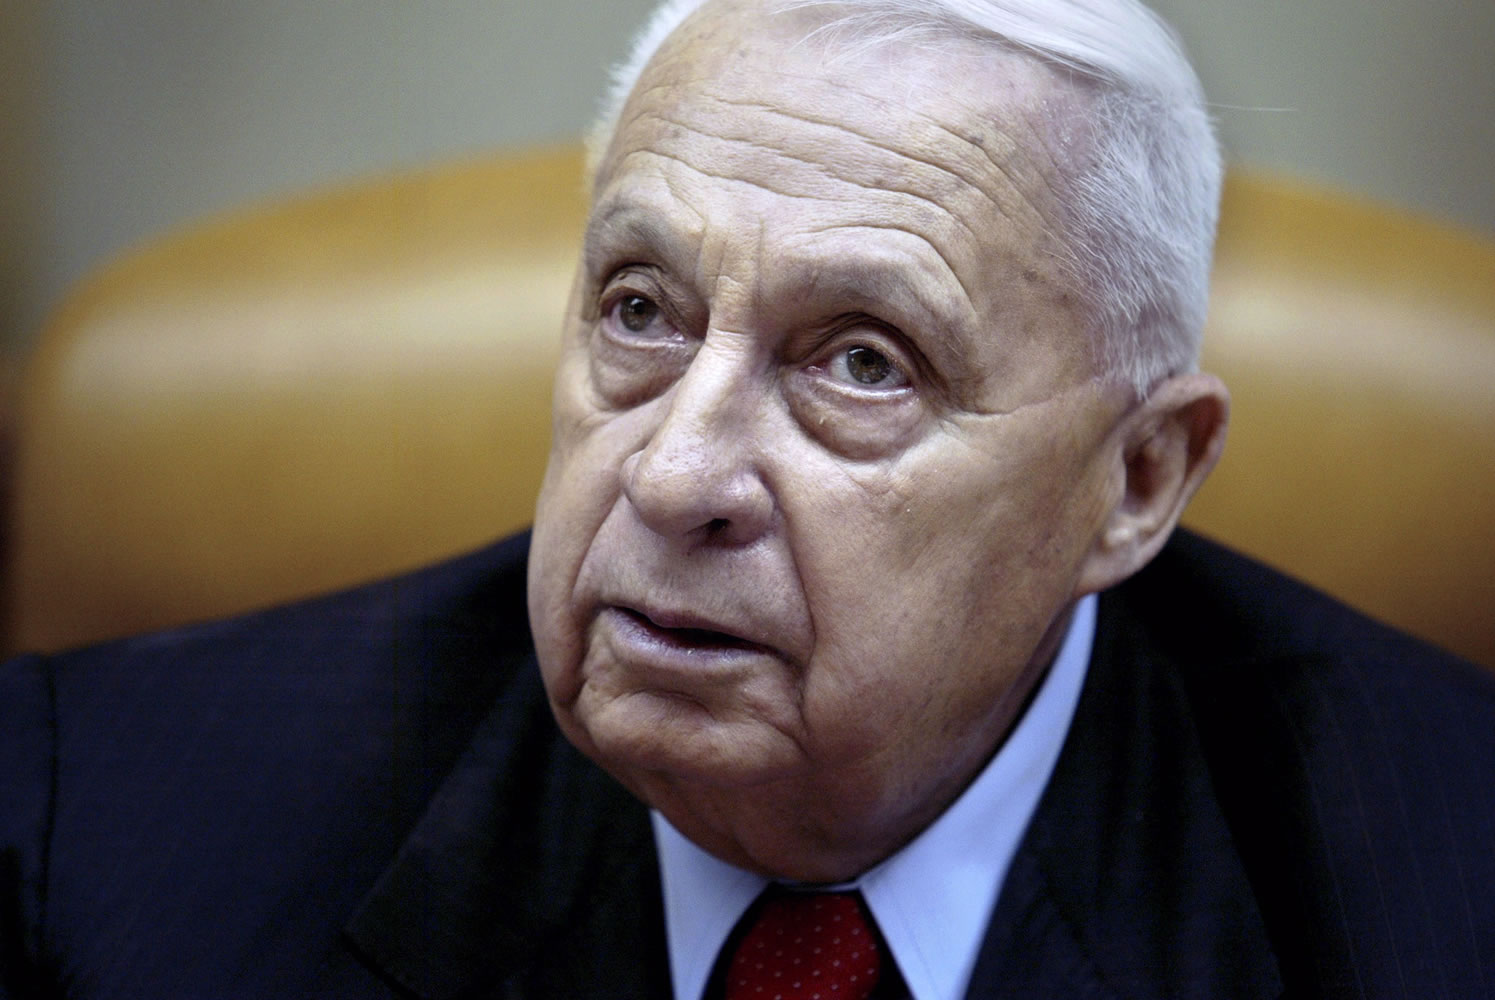 Israeli Prime Minister Ariel Sharon pauses during the weekly cabinet meeting in January 2005 in his Jerusalem office.